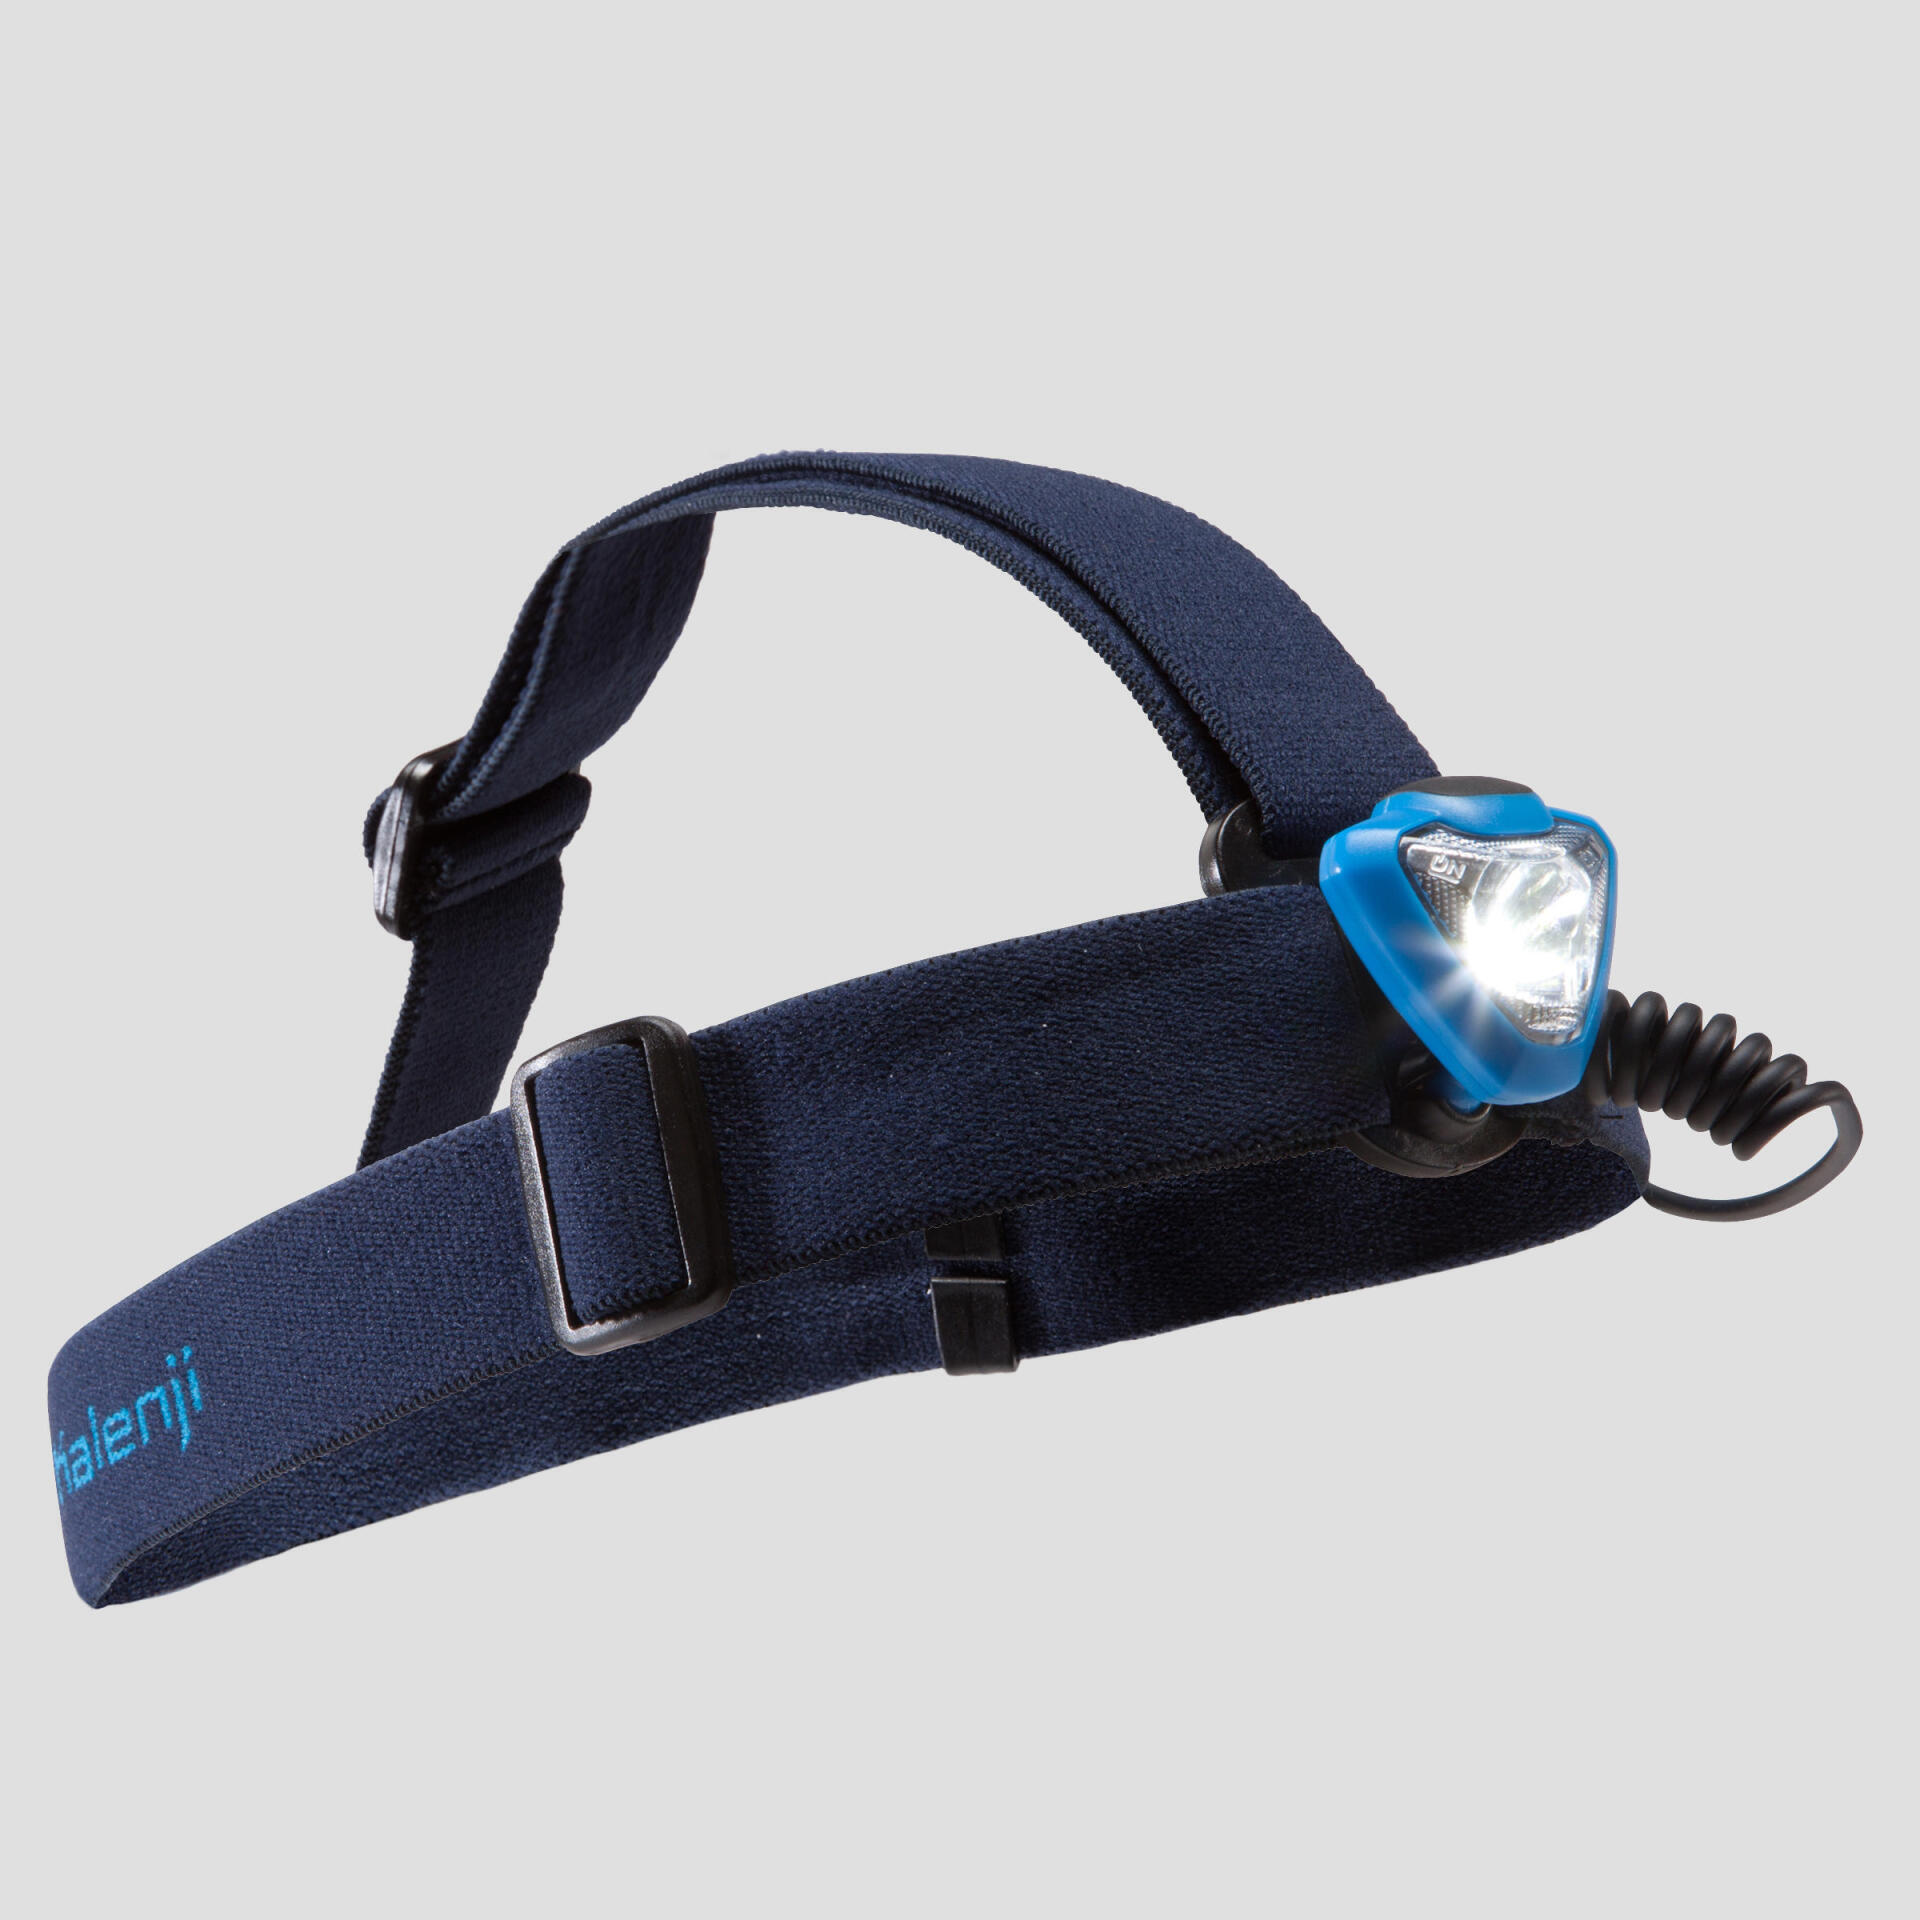 HEADLAMPS, TRAIL WATCHES